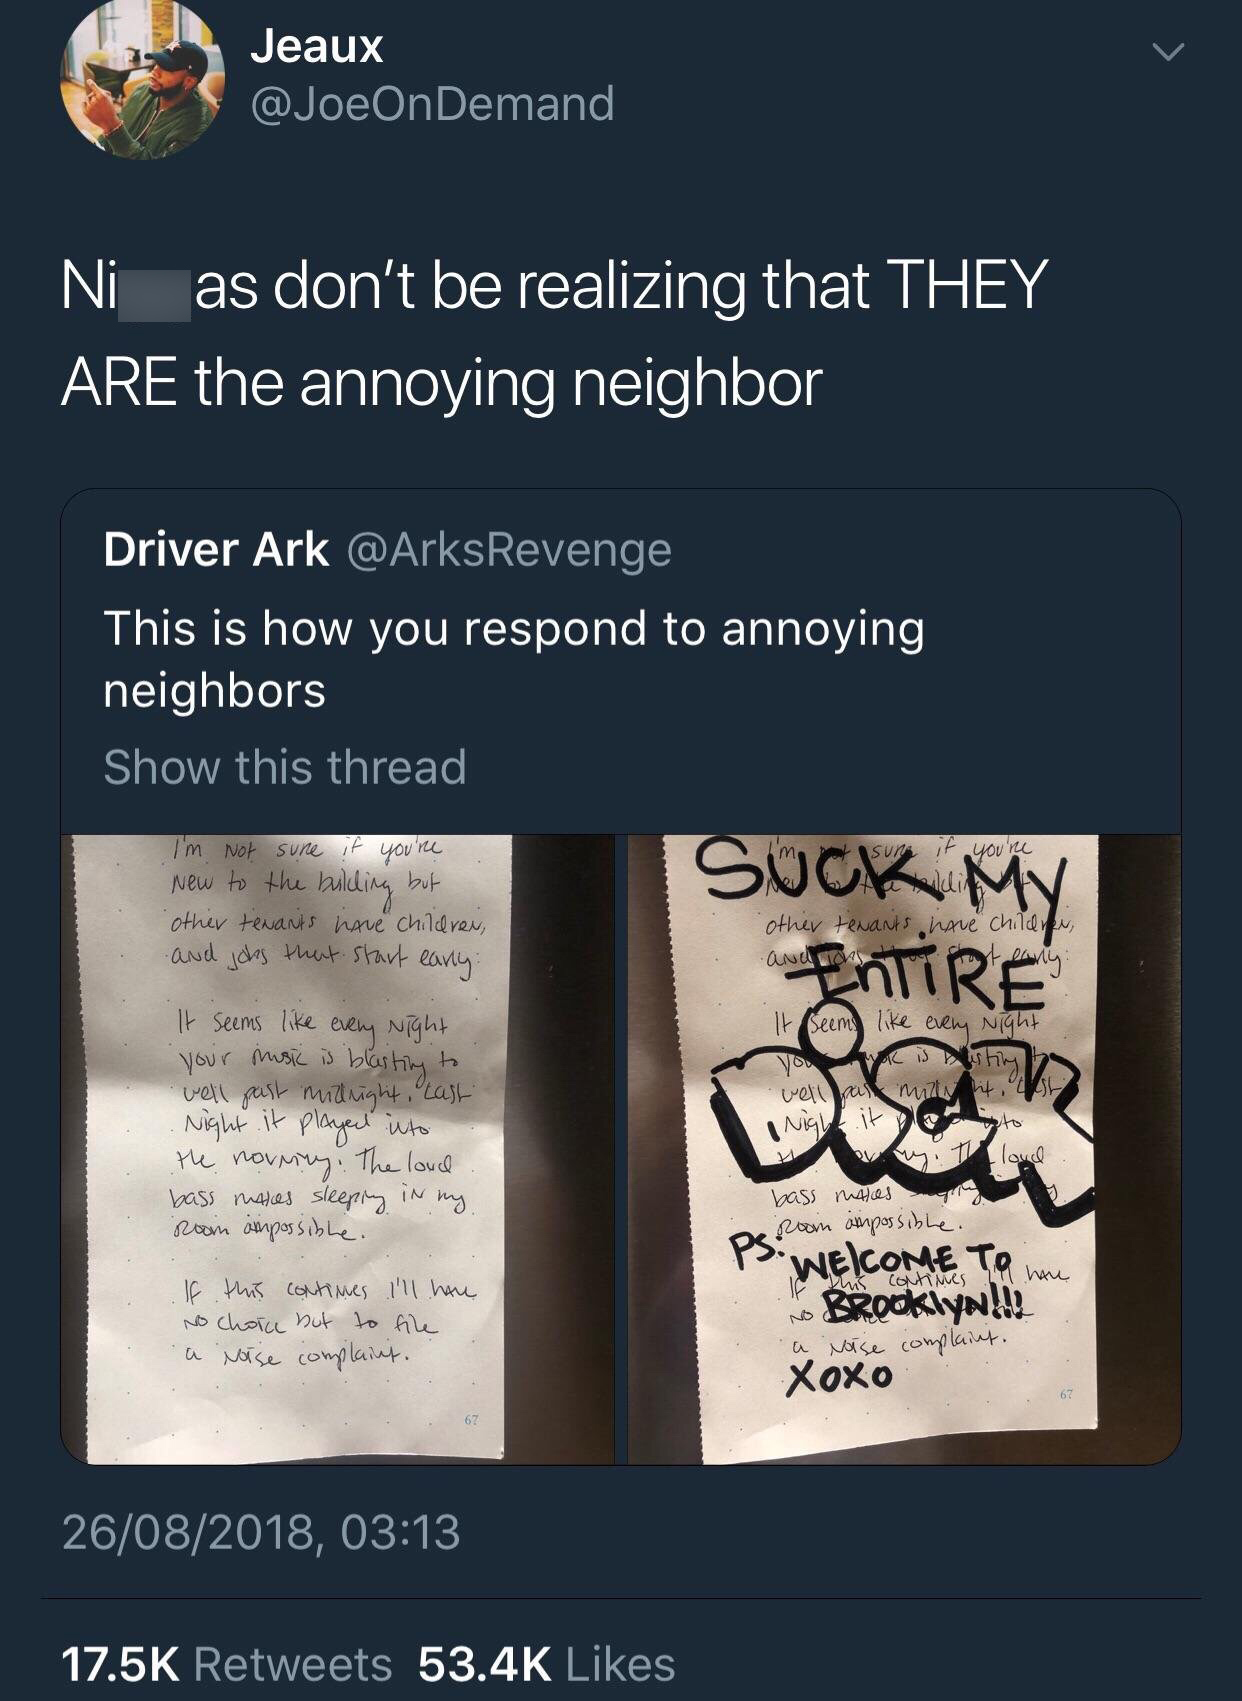 memes about annoying neighbor - Jeaux Ni as don't be realizing that They Are the annoying neighbor Driver Ark Revenge This is how you respond to annoying neighbors Show this thread ht at de Suck My Entire Mo June 01 Wir V y The Al Ol P. We corte To How le